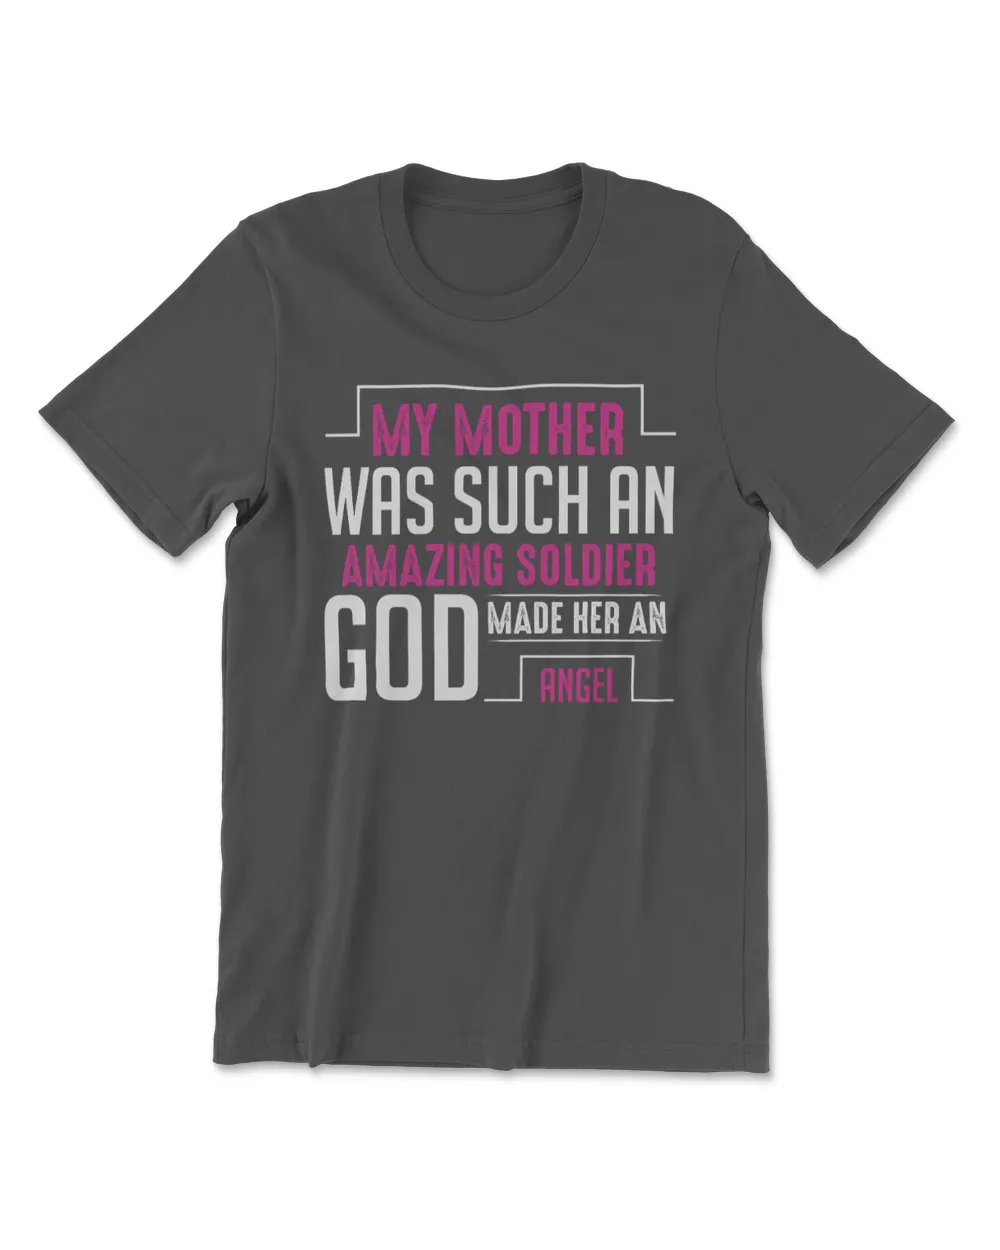 My mother was such an amazing soldier god made her an angel t shirt